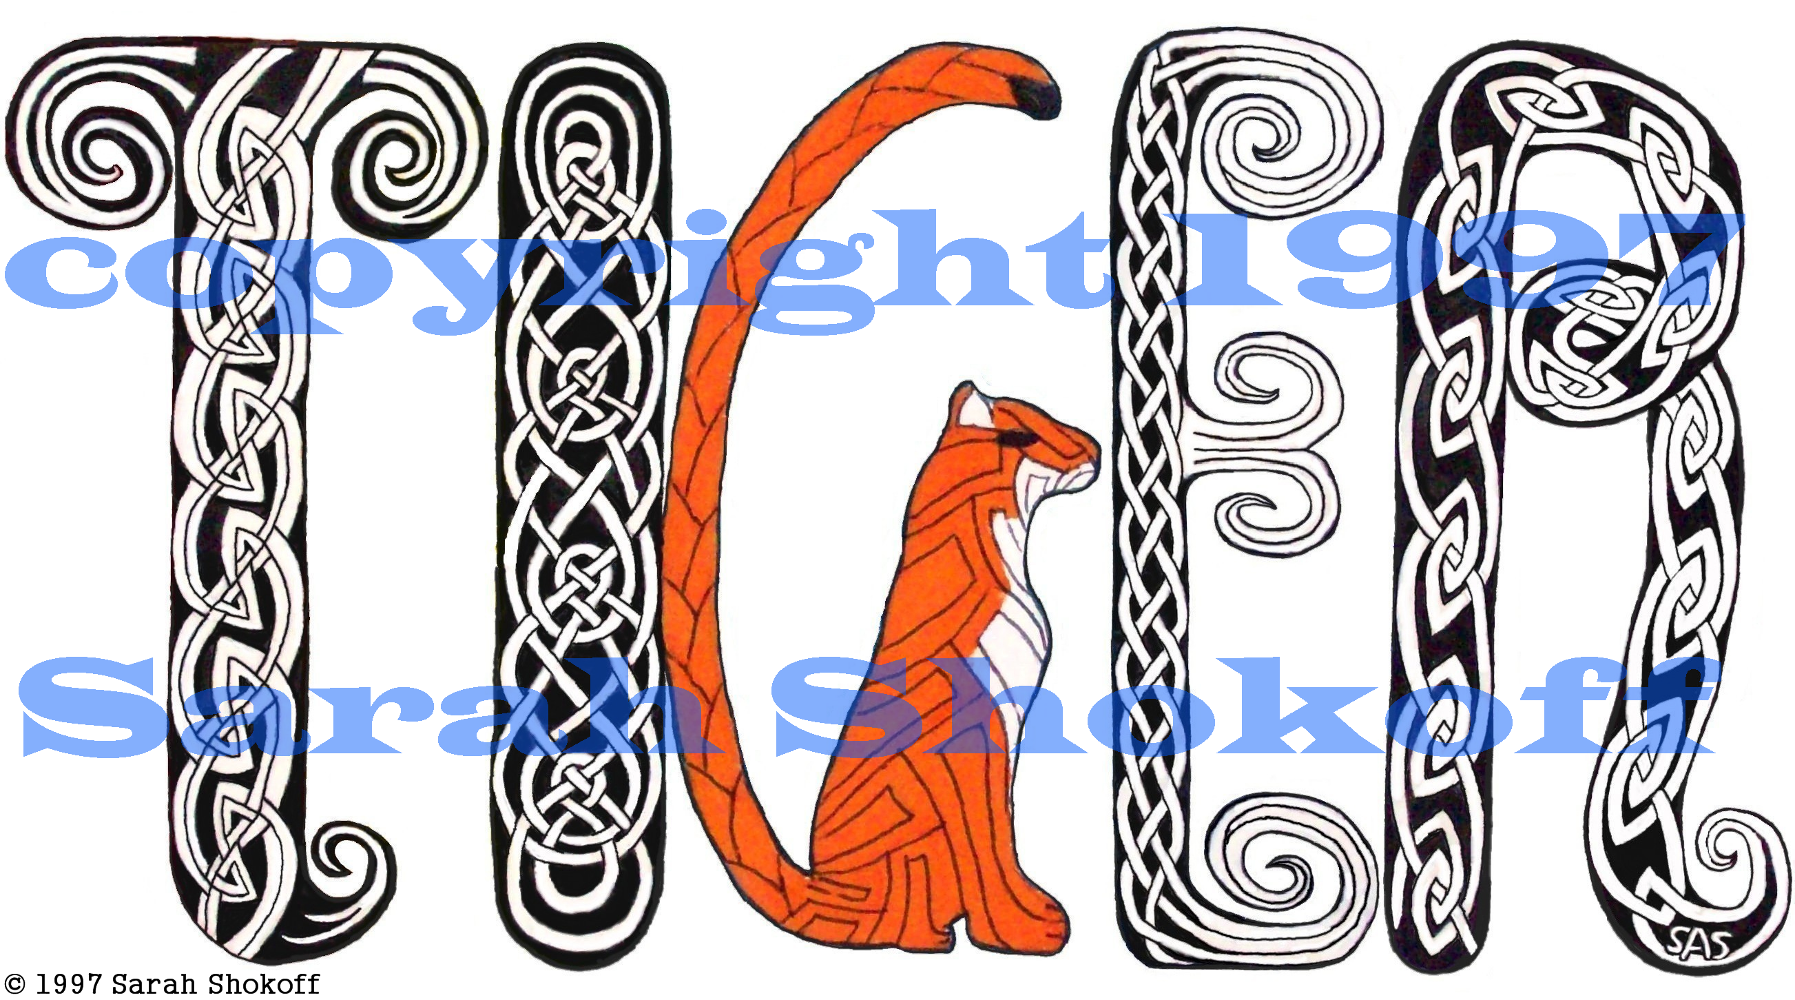 the word tiger is made up of four kinds of celtic knotwork in black and white and an orange tiger